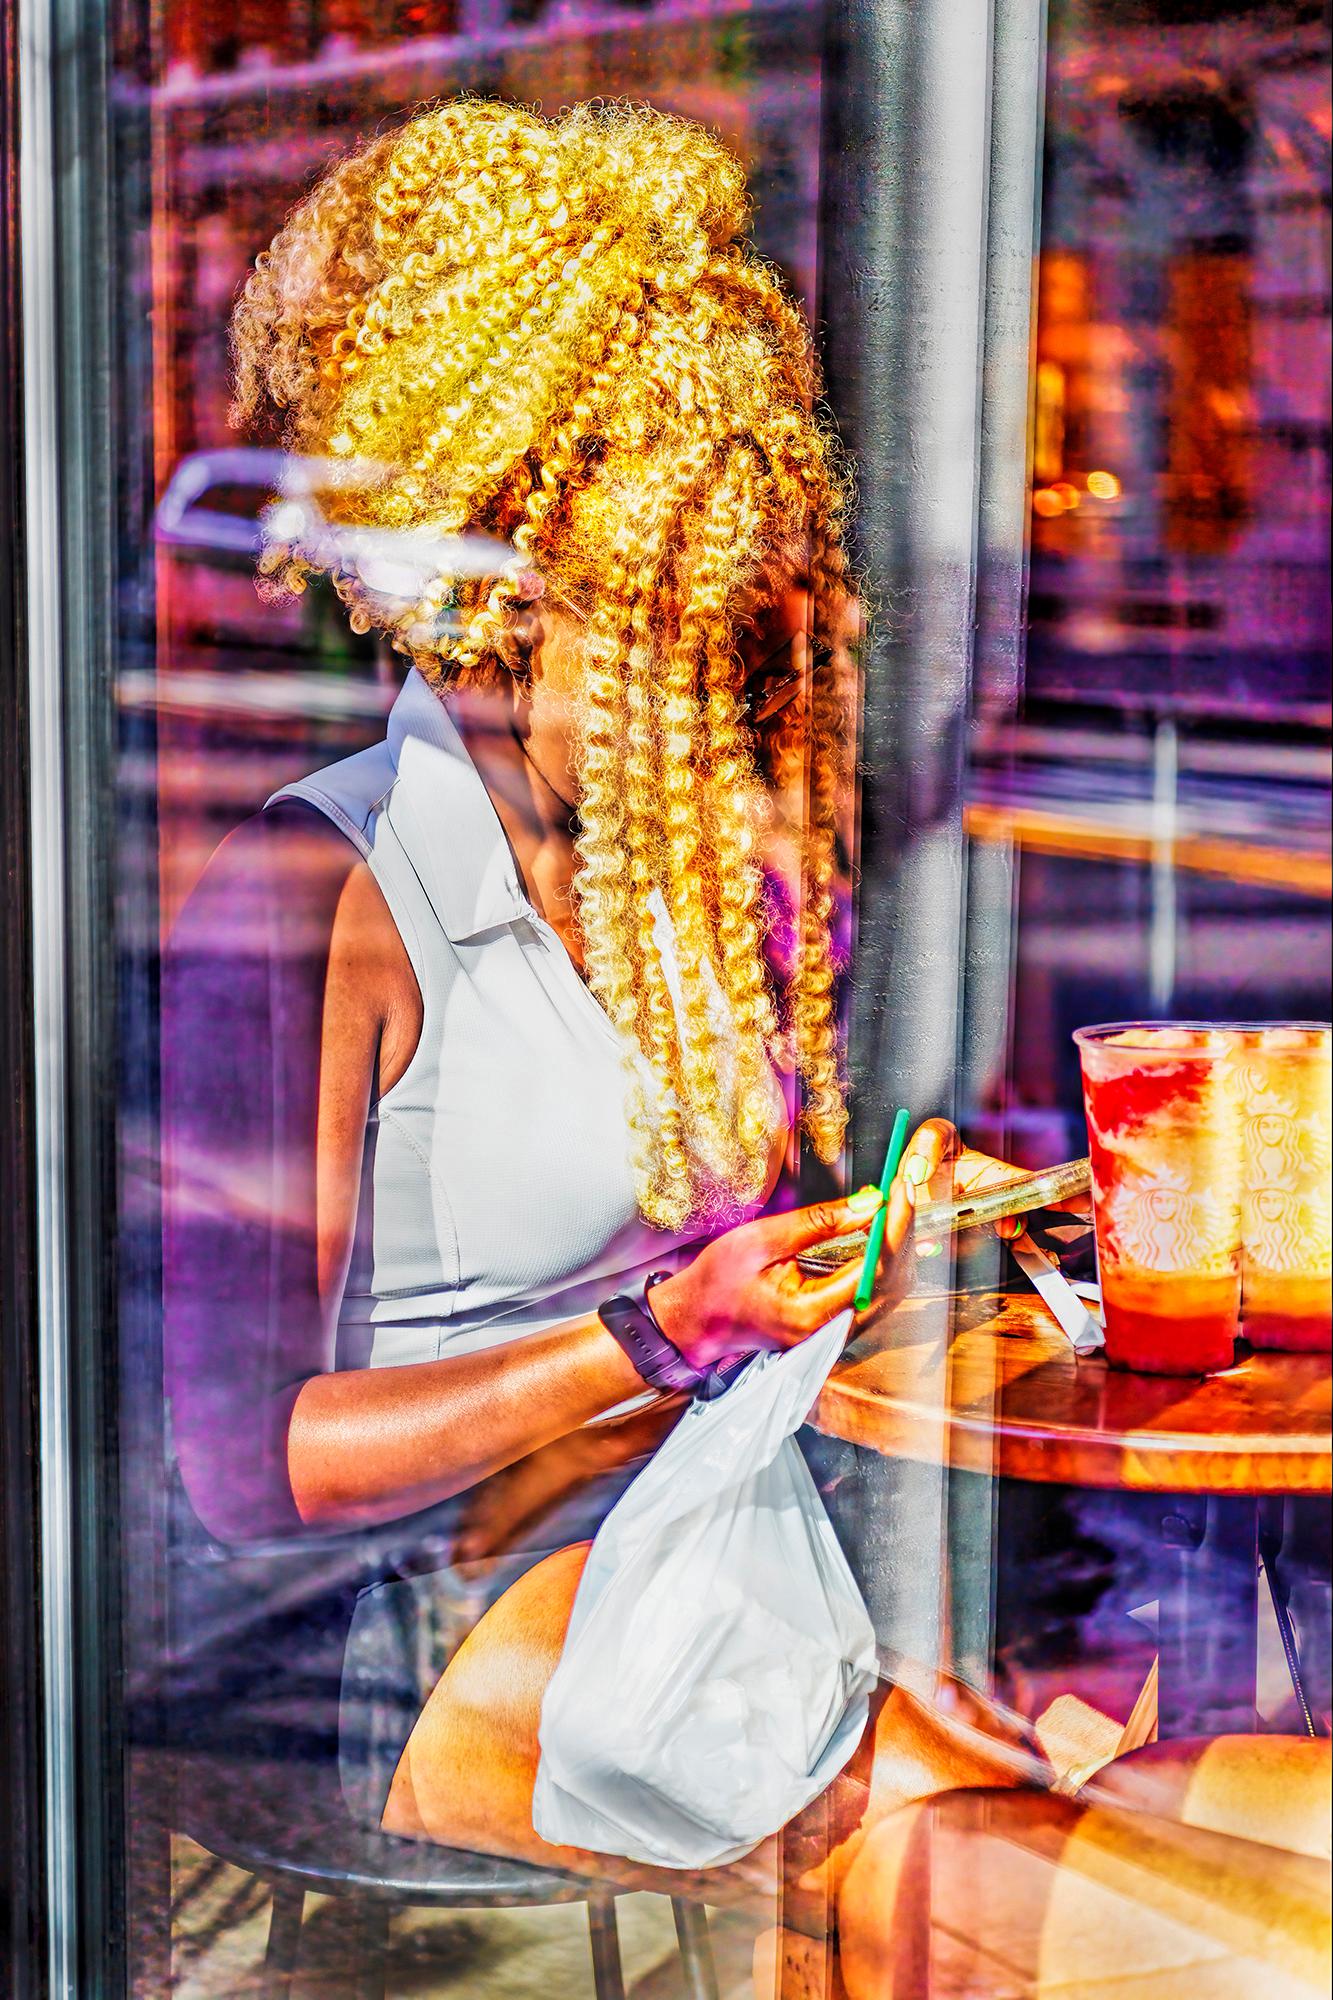 Mitchell Funk Portrait Photograph - Black Woman with Flamboyant Hair at Cafe